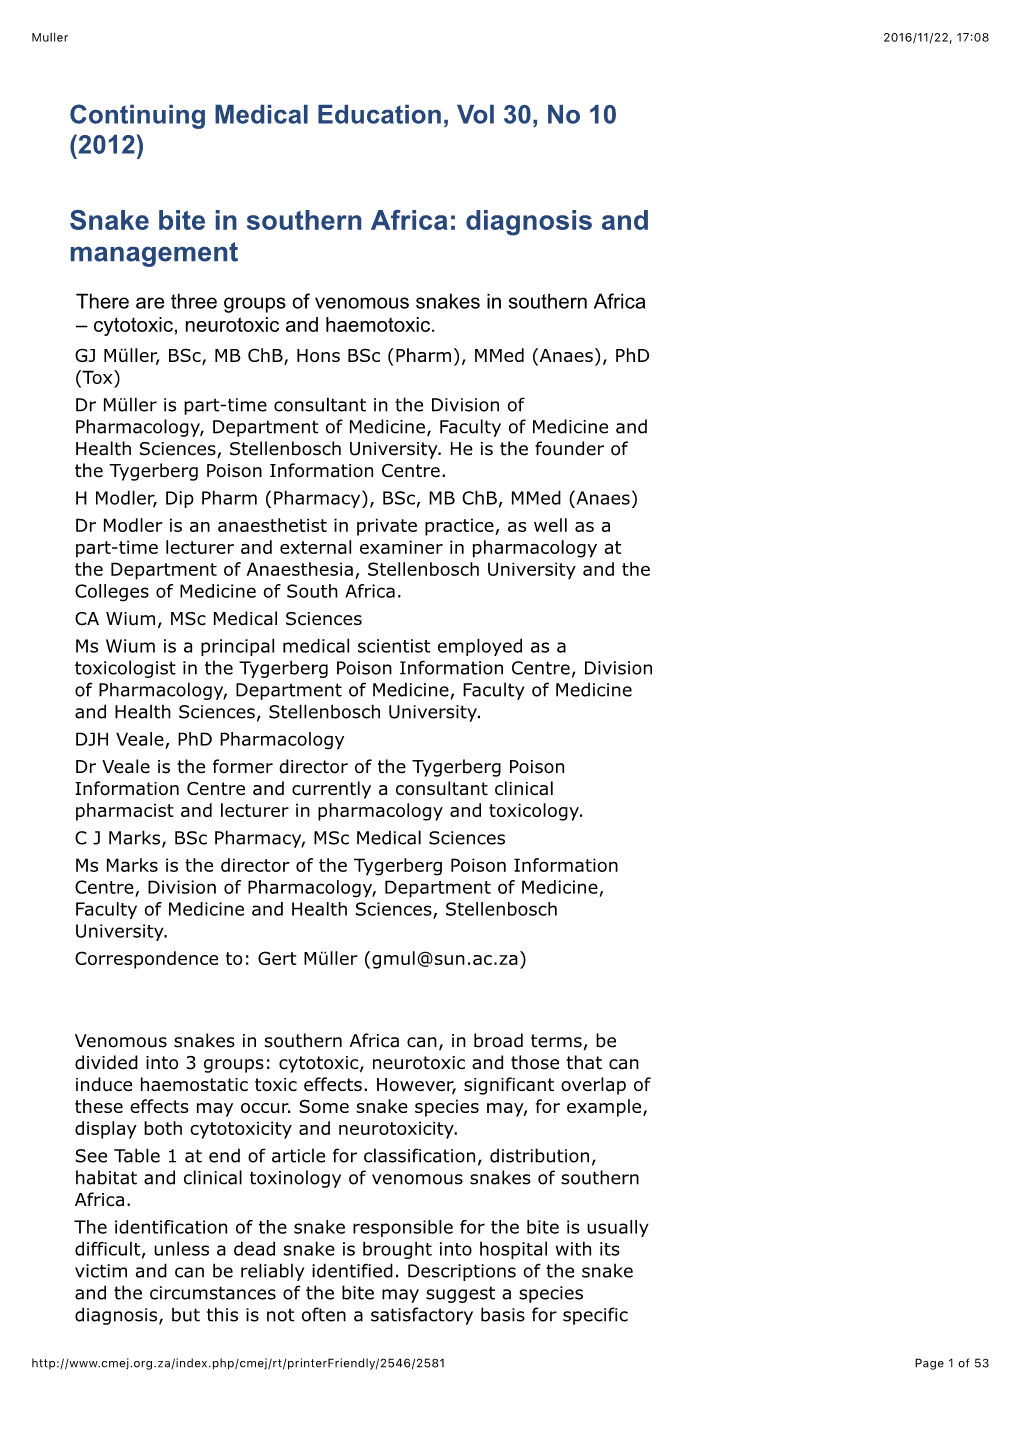 Snake Bite in Southern Africa: Diagnosis and Management